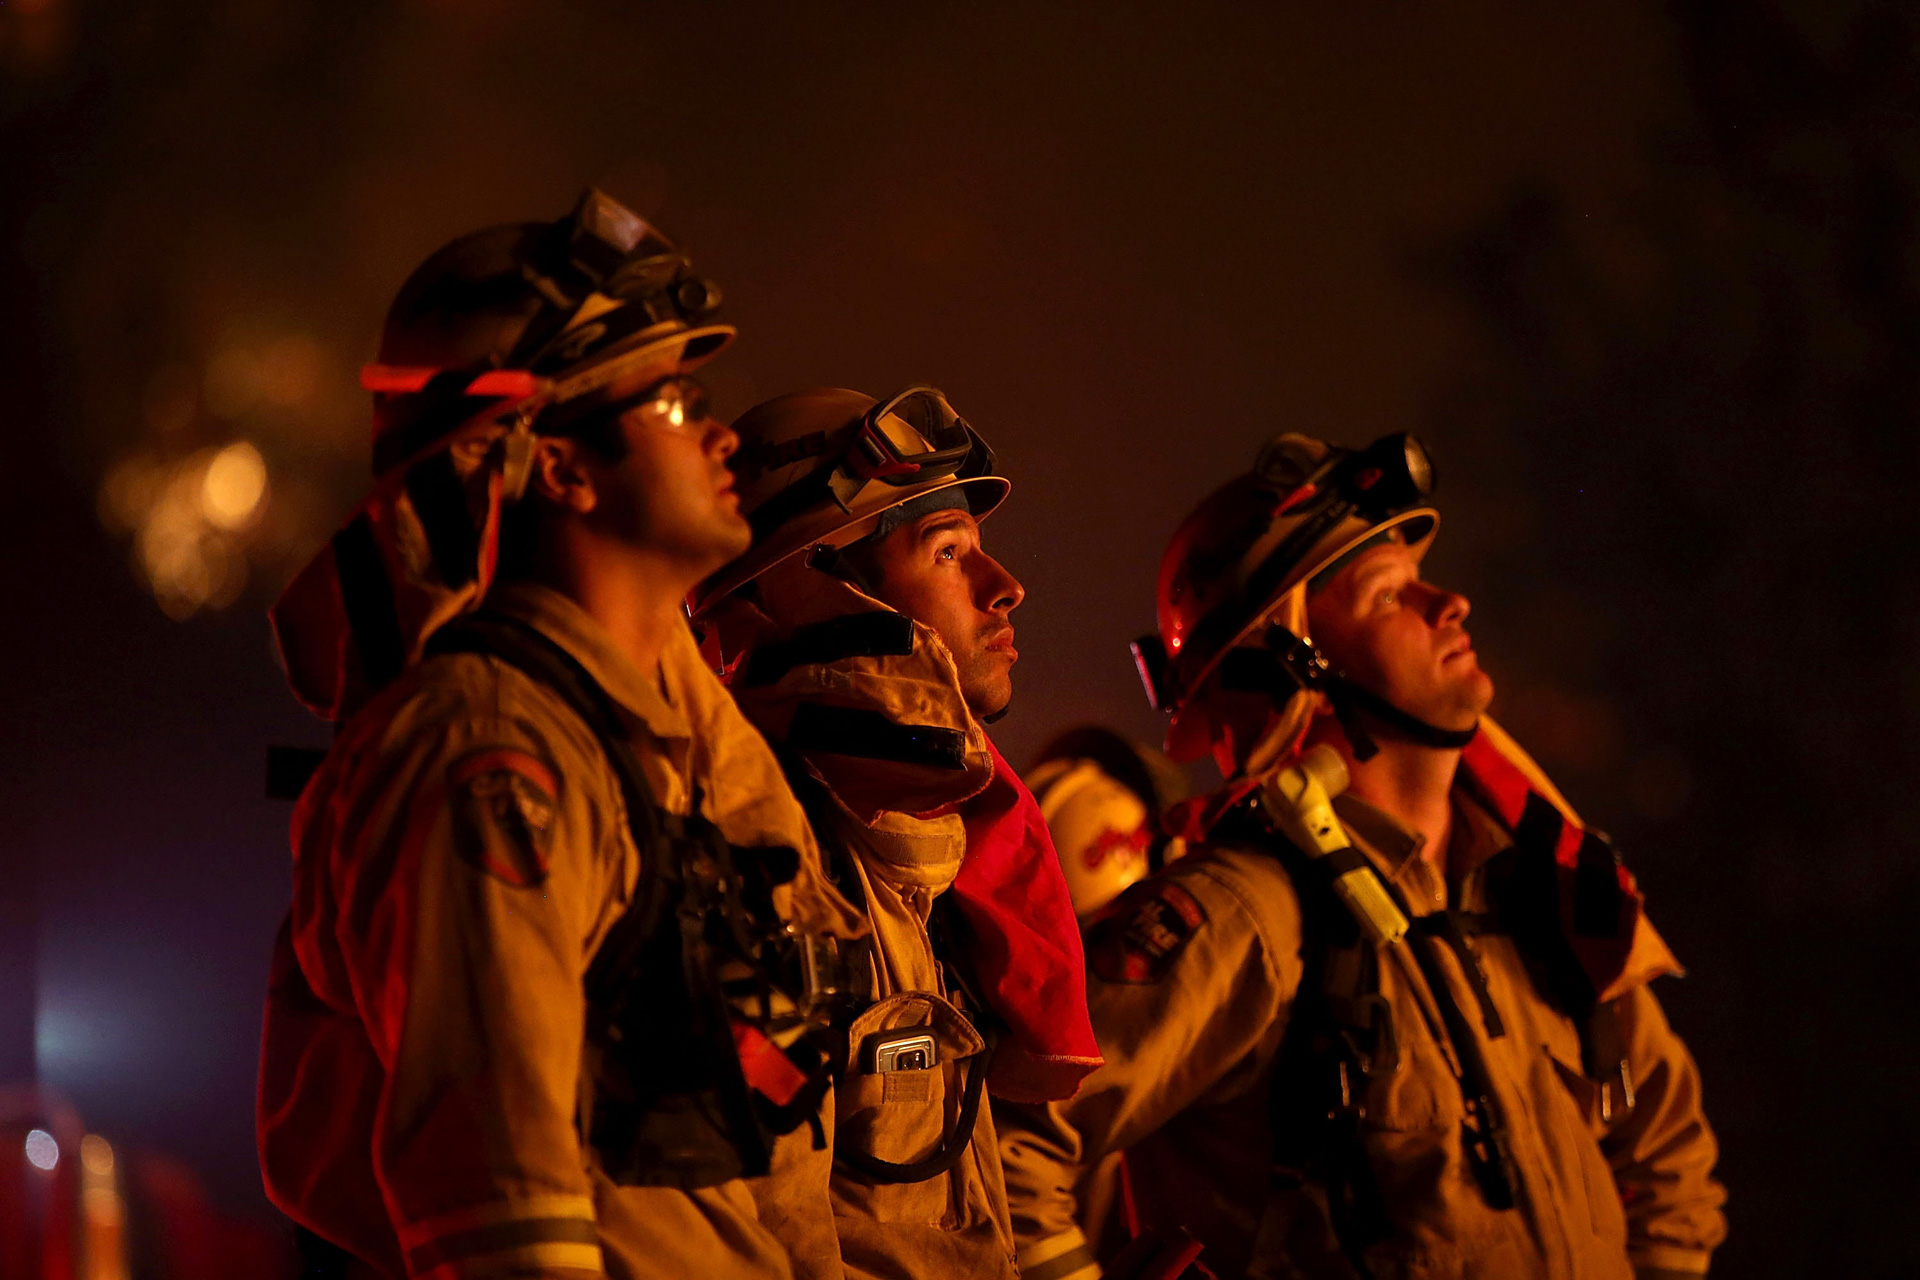 California Burning: Dramatic Photos Of Firefighters In Action